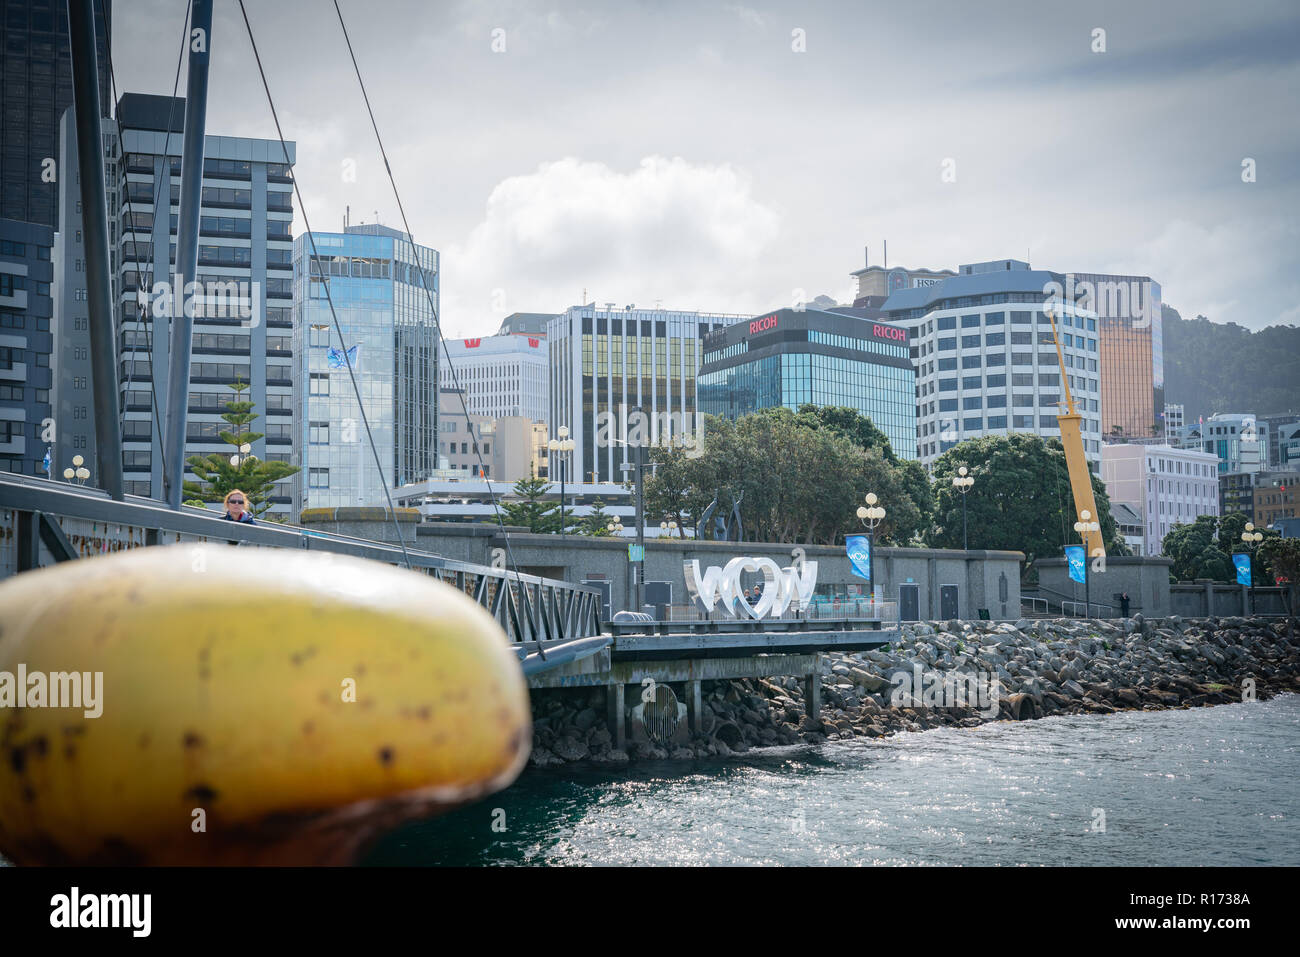 WELLINGTON, NEW ZEALAND - OCTOBER 1 2018; World of Wearable Art iconic shiny silver sign on city waterfront with cuty commercial skyline behind. Stock Photo